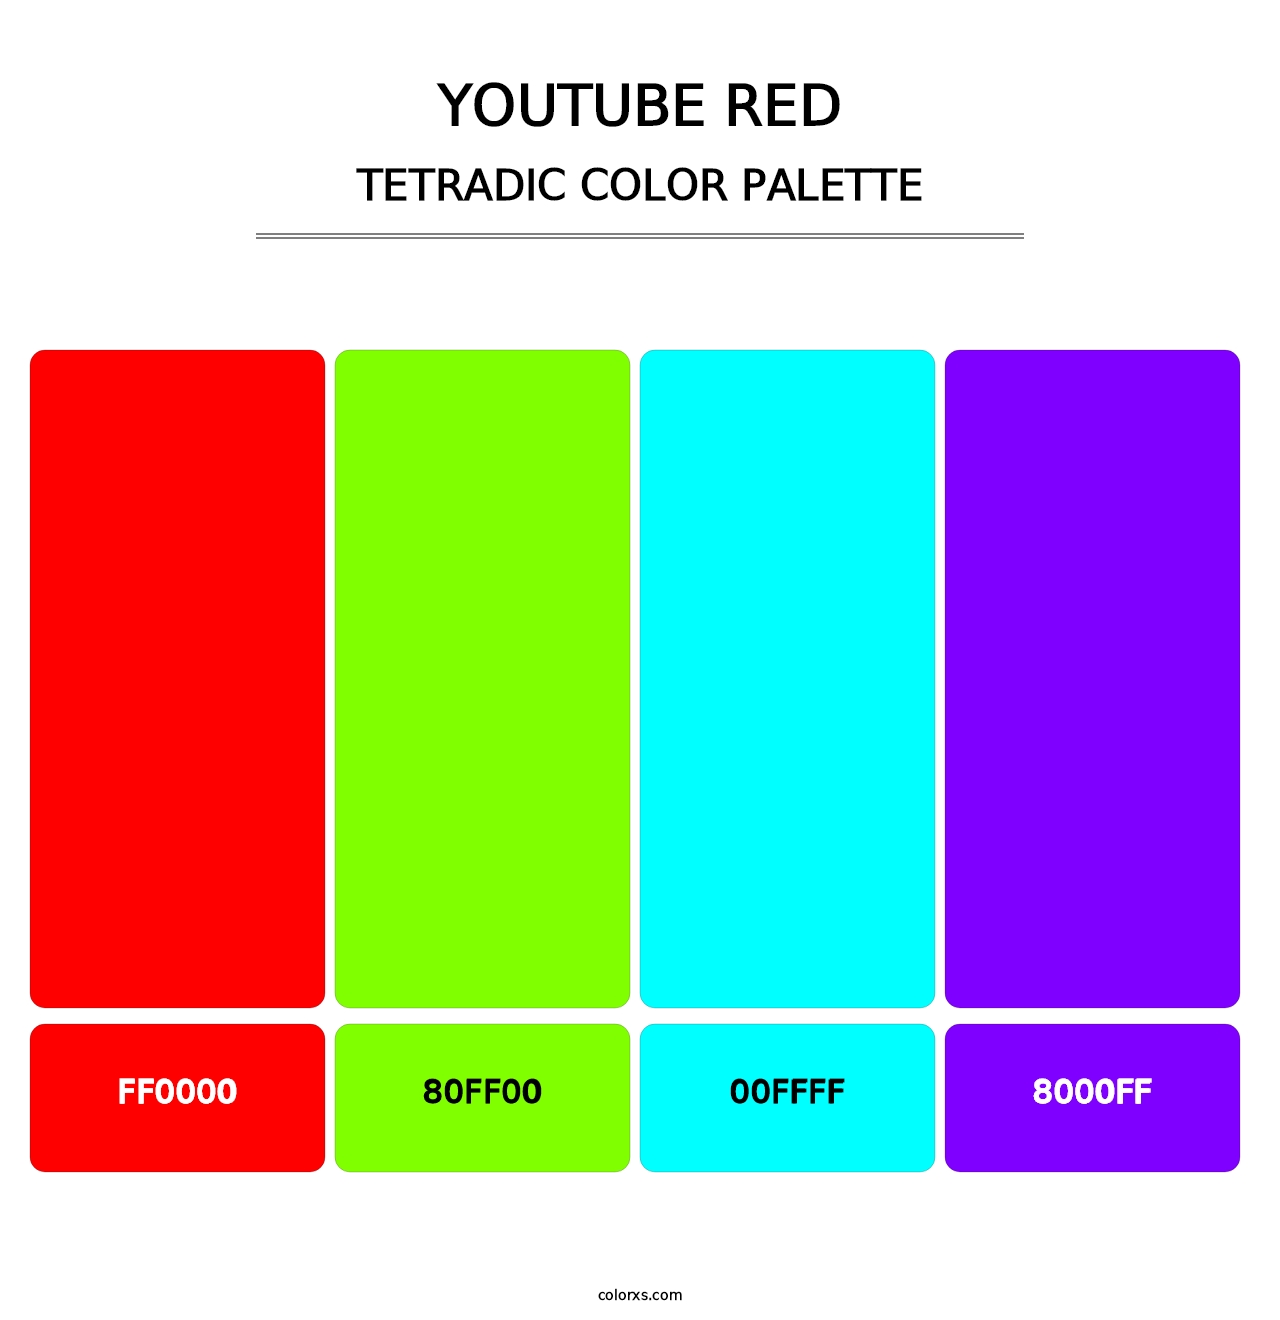 YouTube Red - Tetradic Color Palette